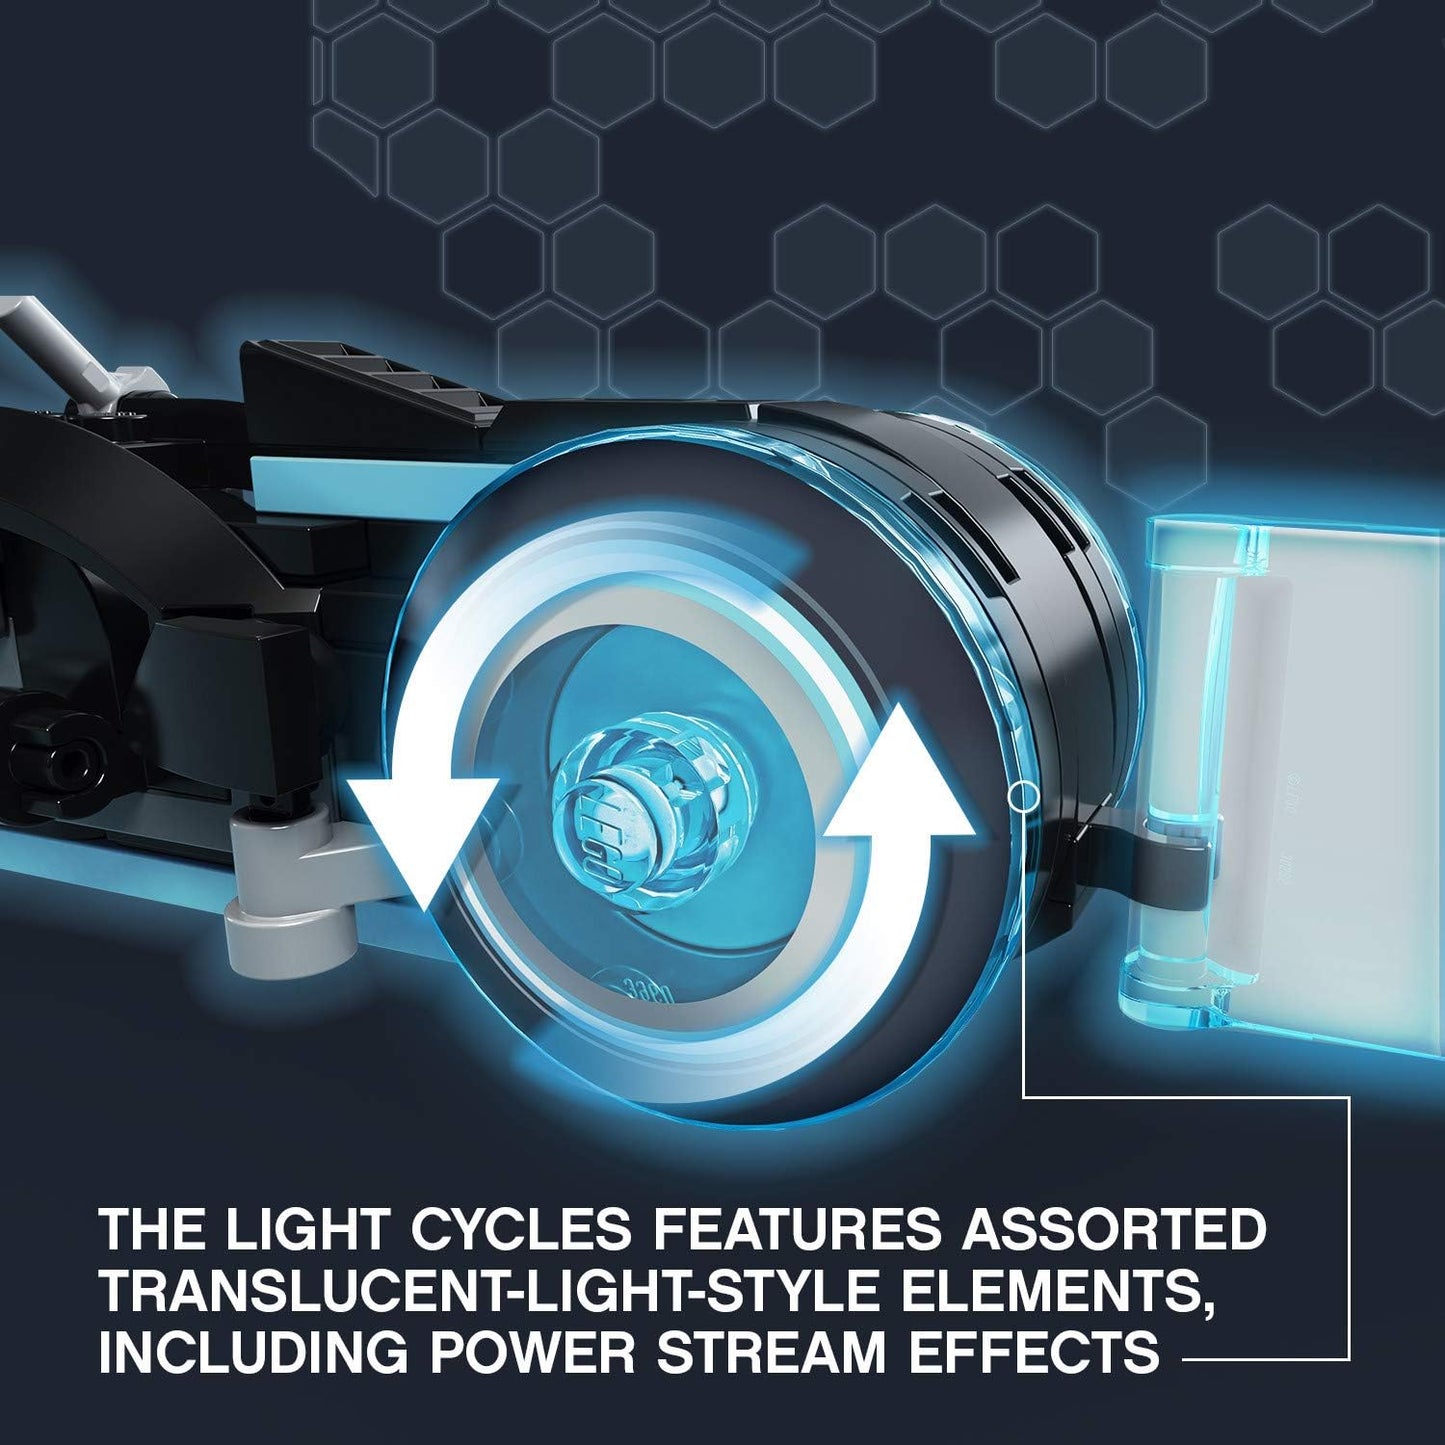 LEGO Ideas TRON: Legacy 21314 Construction Toy inspired by Disney’s TRON: Legacy movie (230 Pieces)